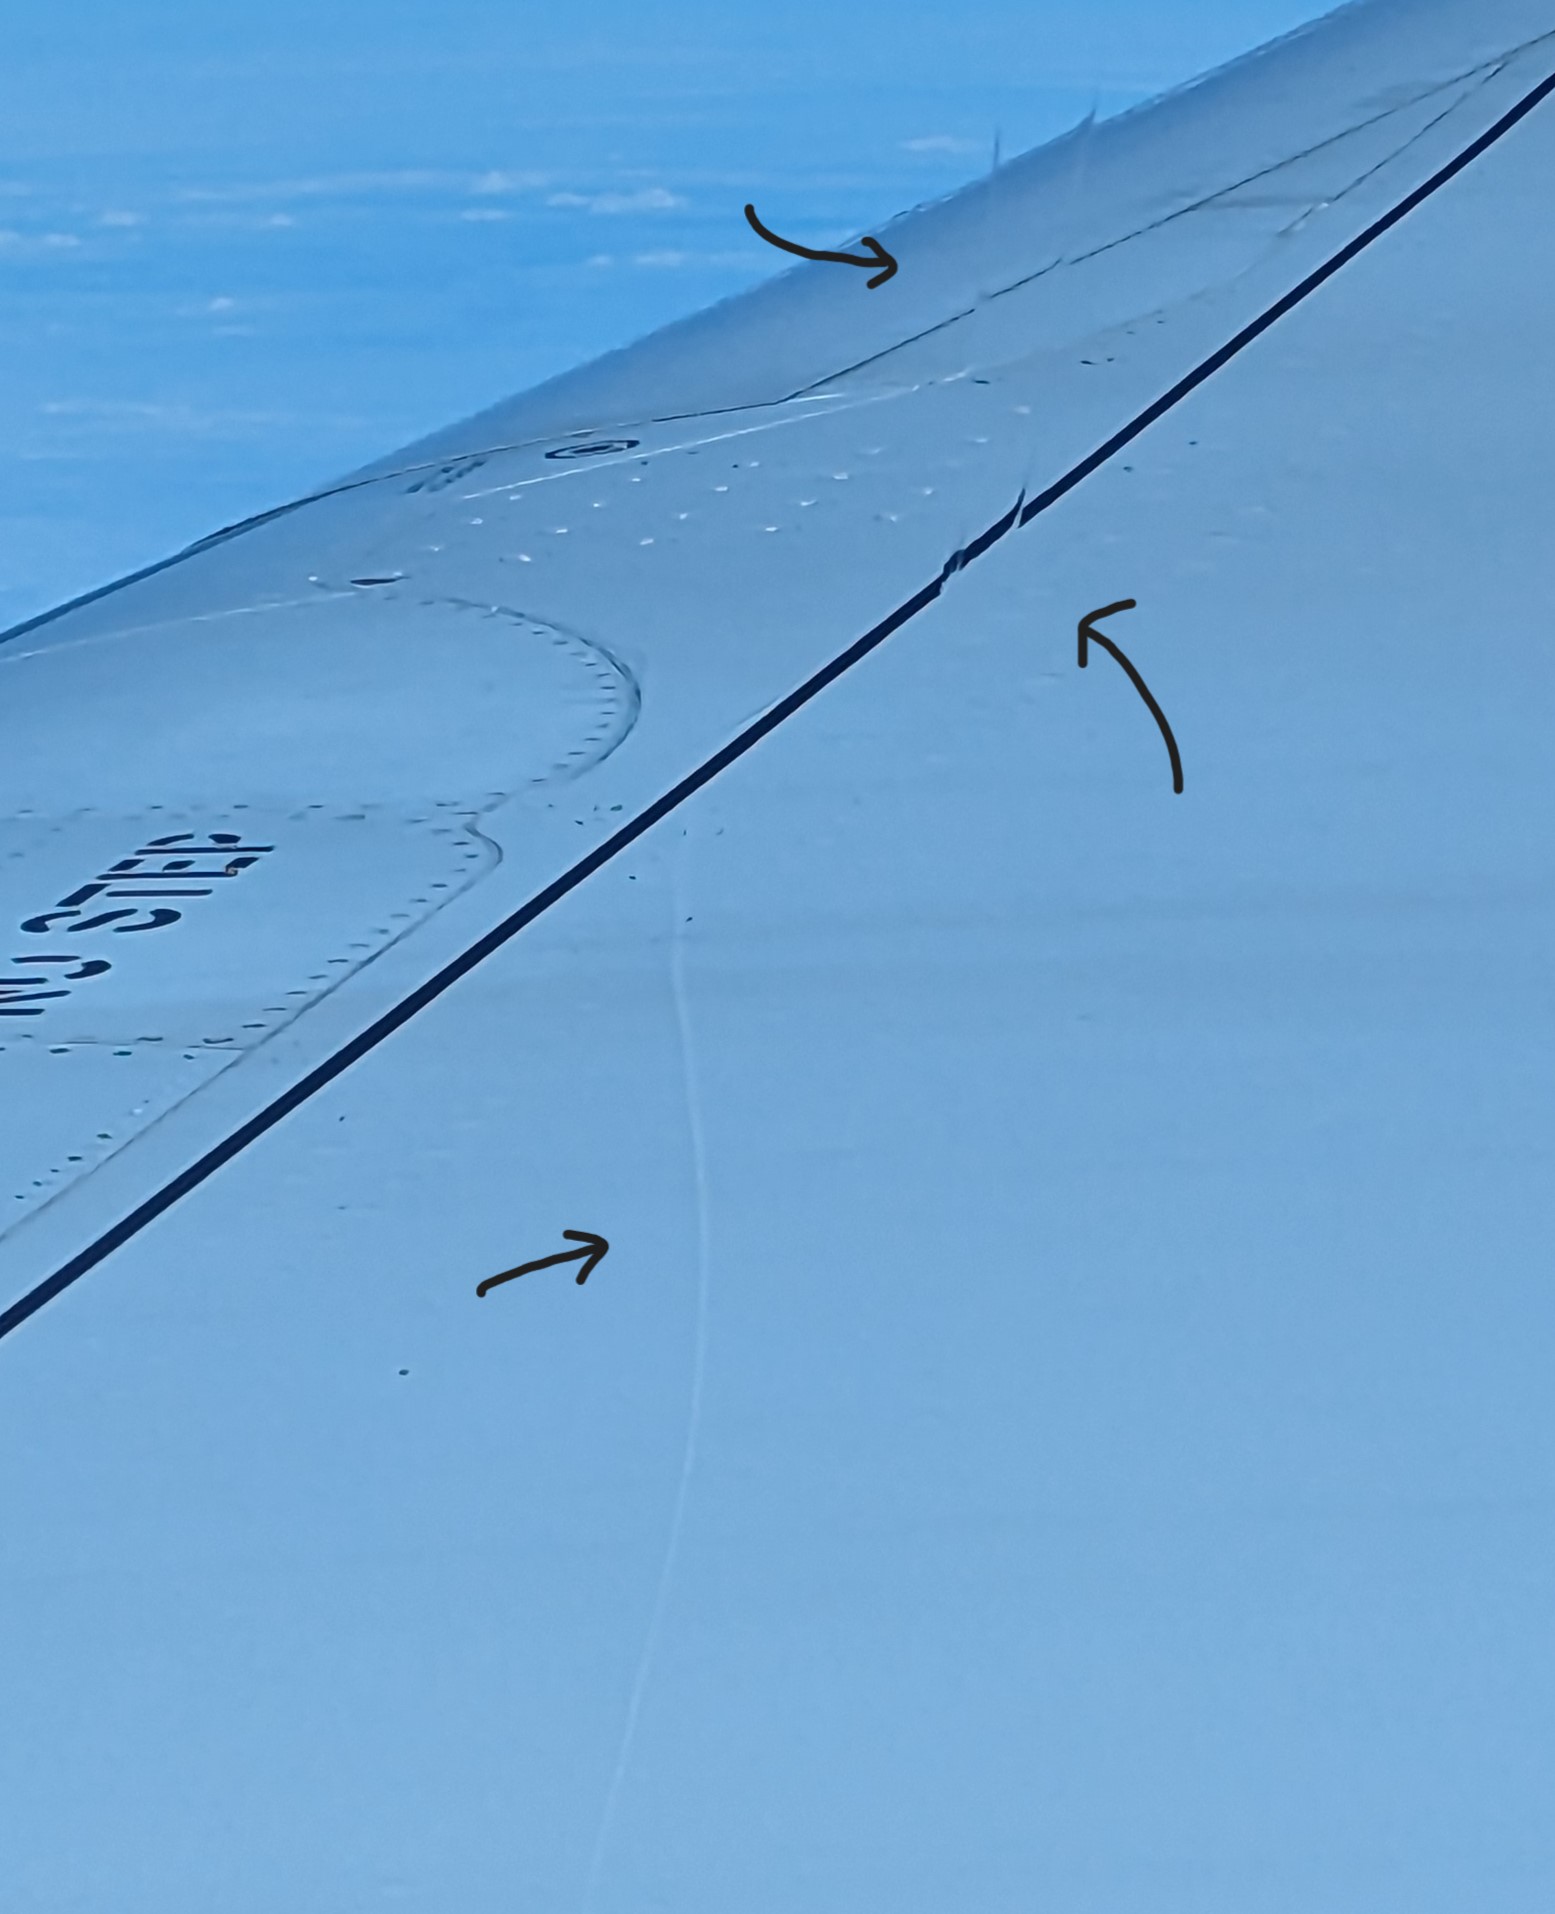 Shockwaves on an airplane wing